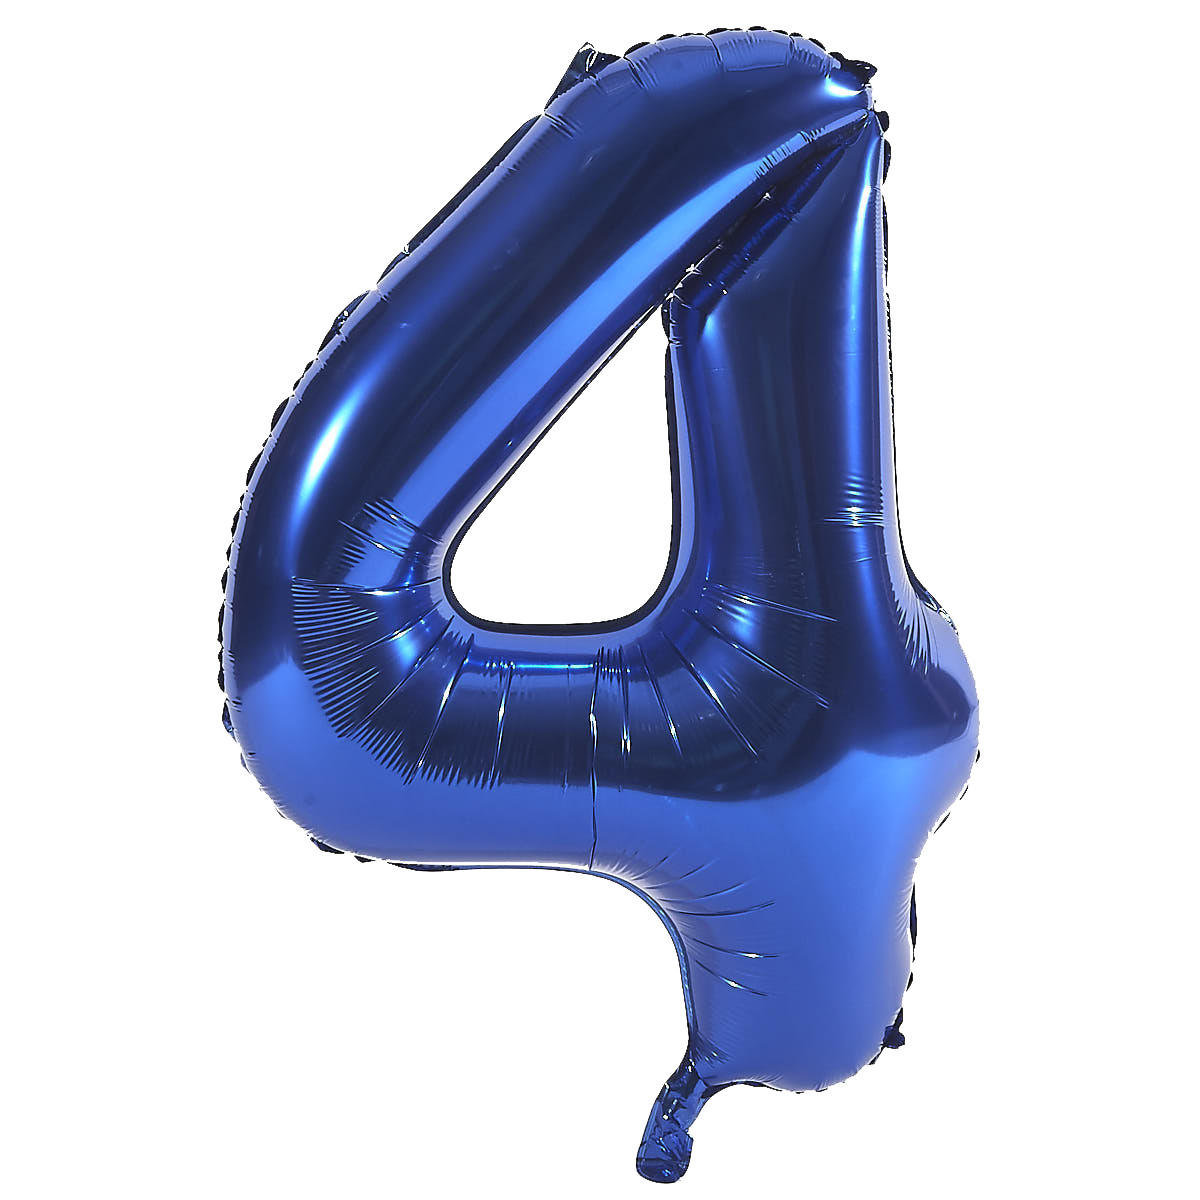 Age 40 Giant Foil Helium Numeral Balloons - Blue (deflated)